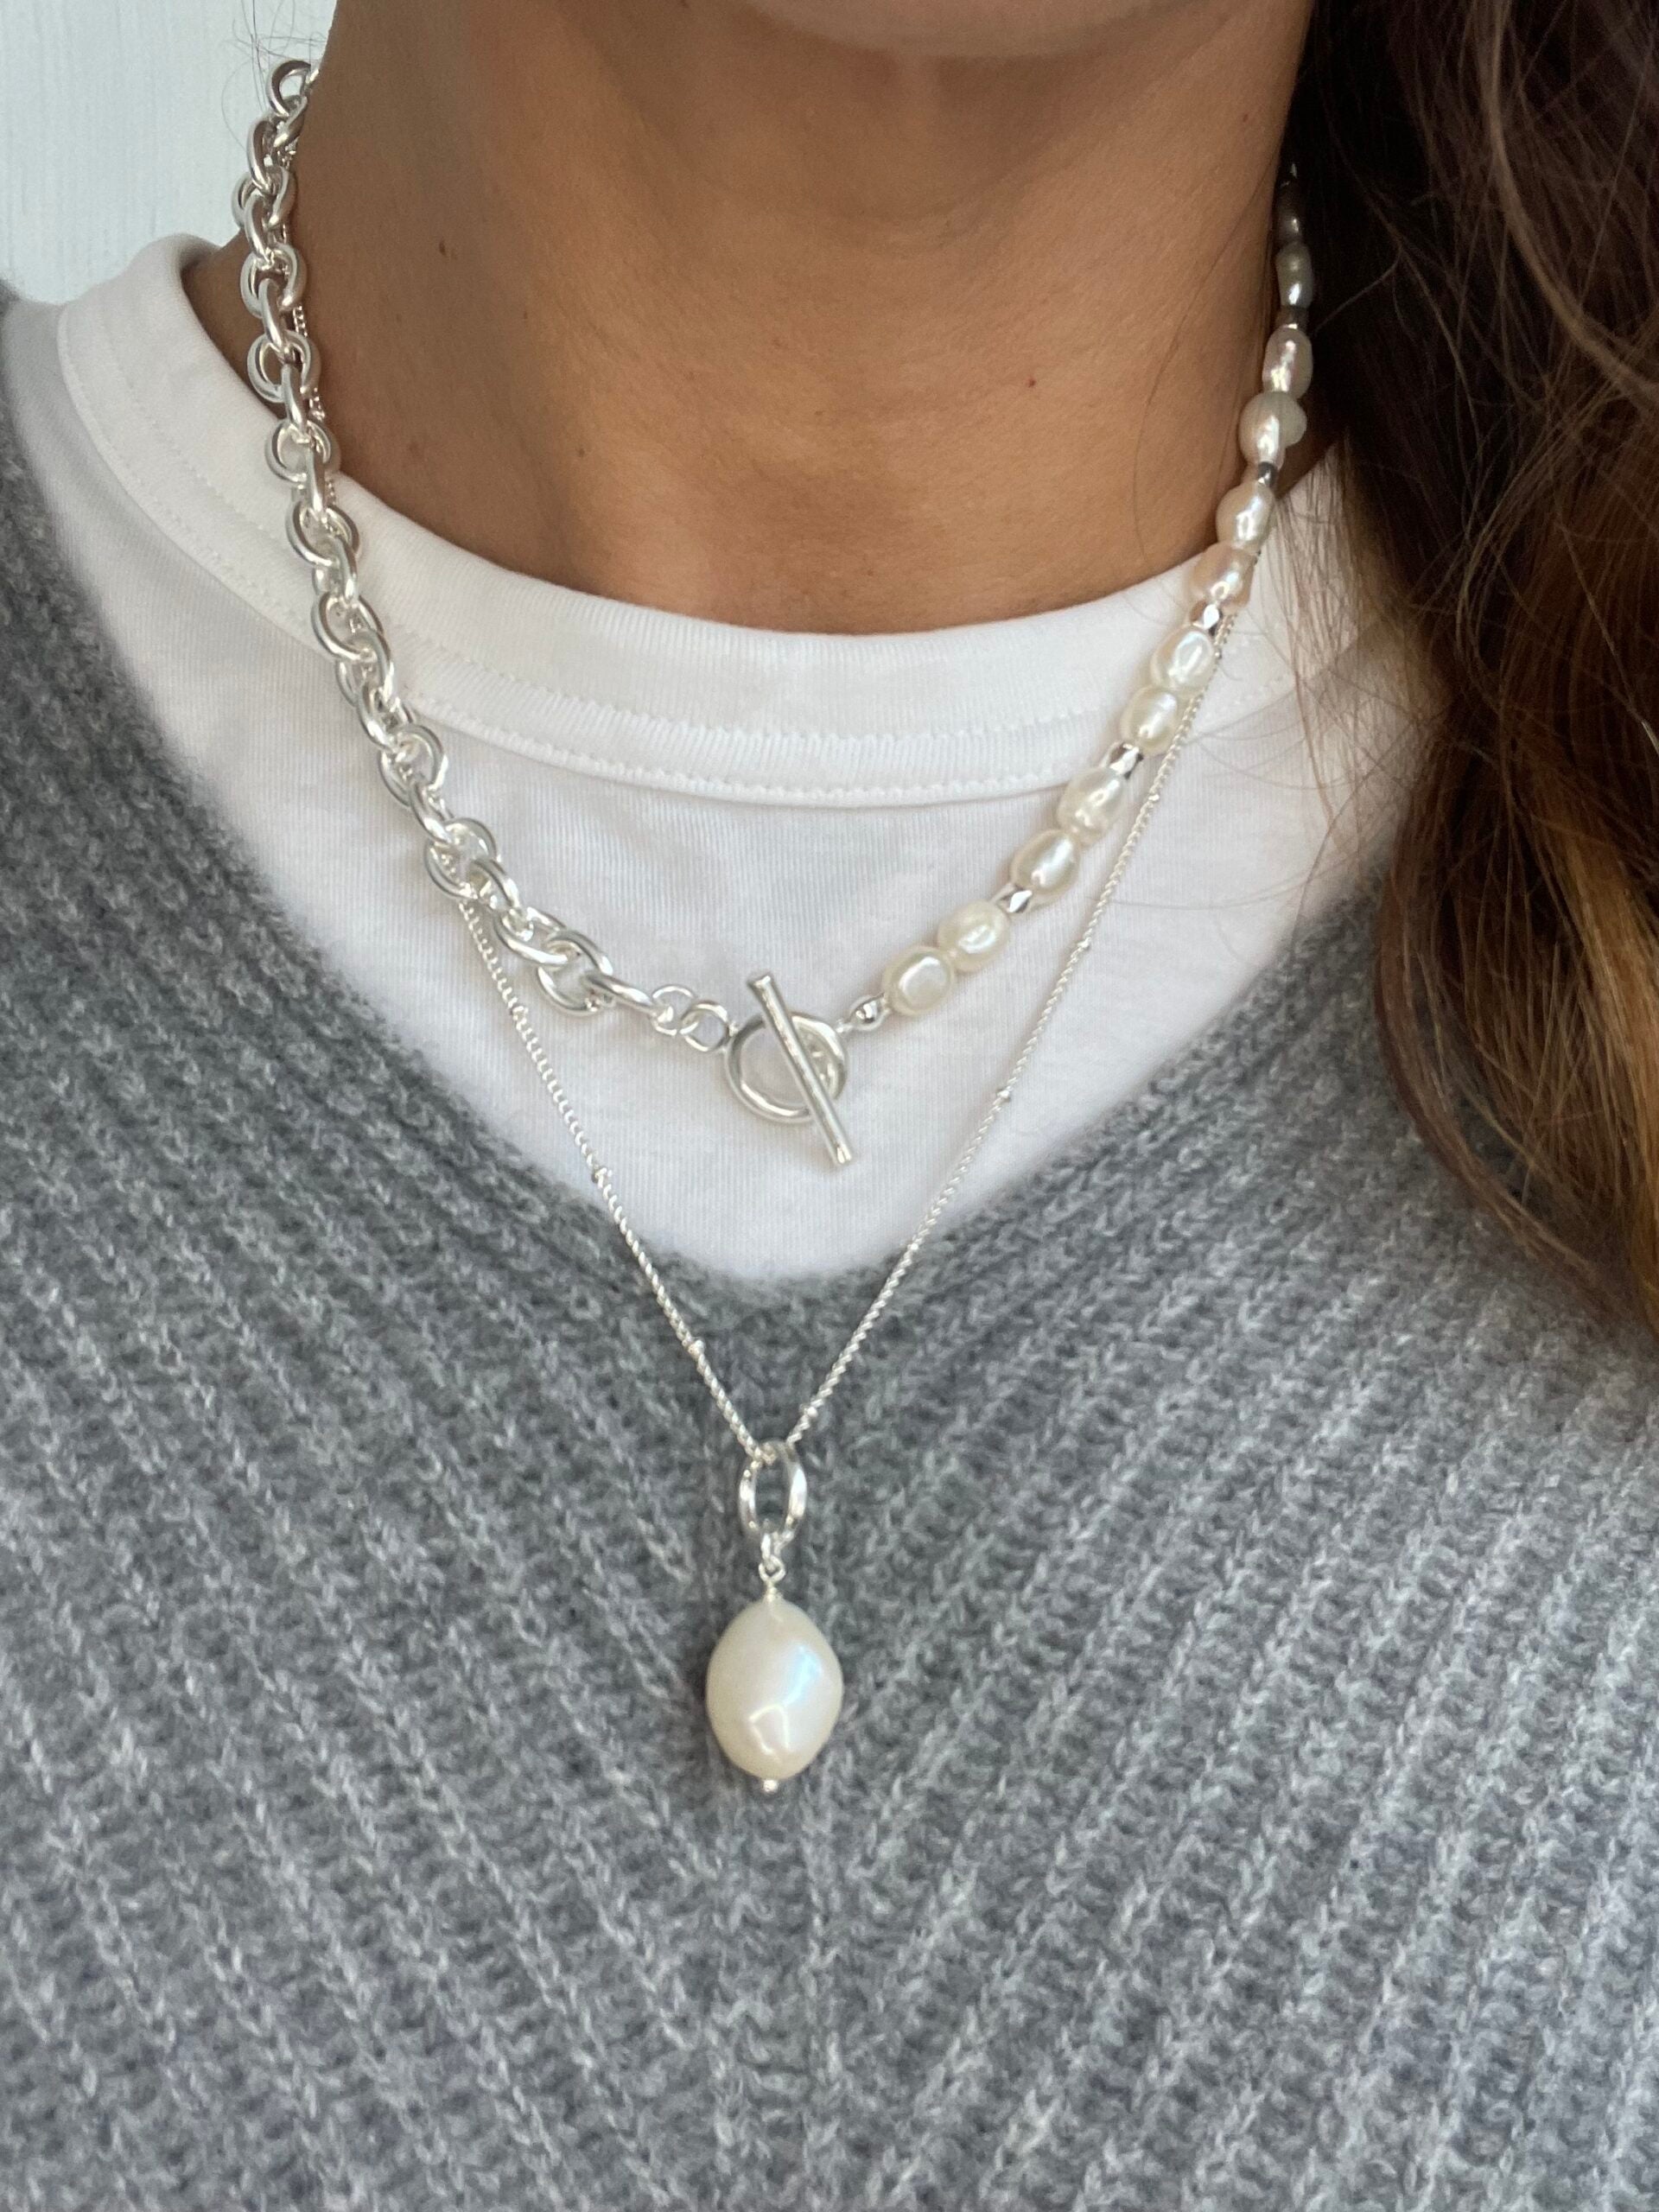 Jean freshwater pearl necklace | Olia